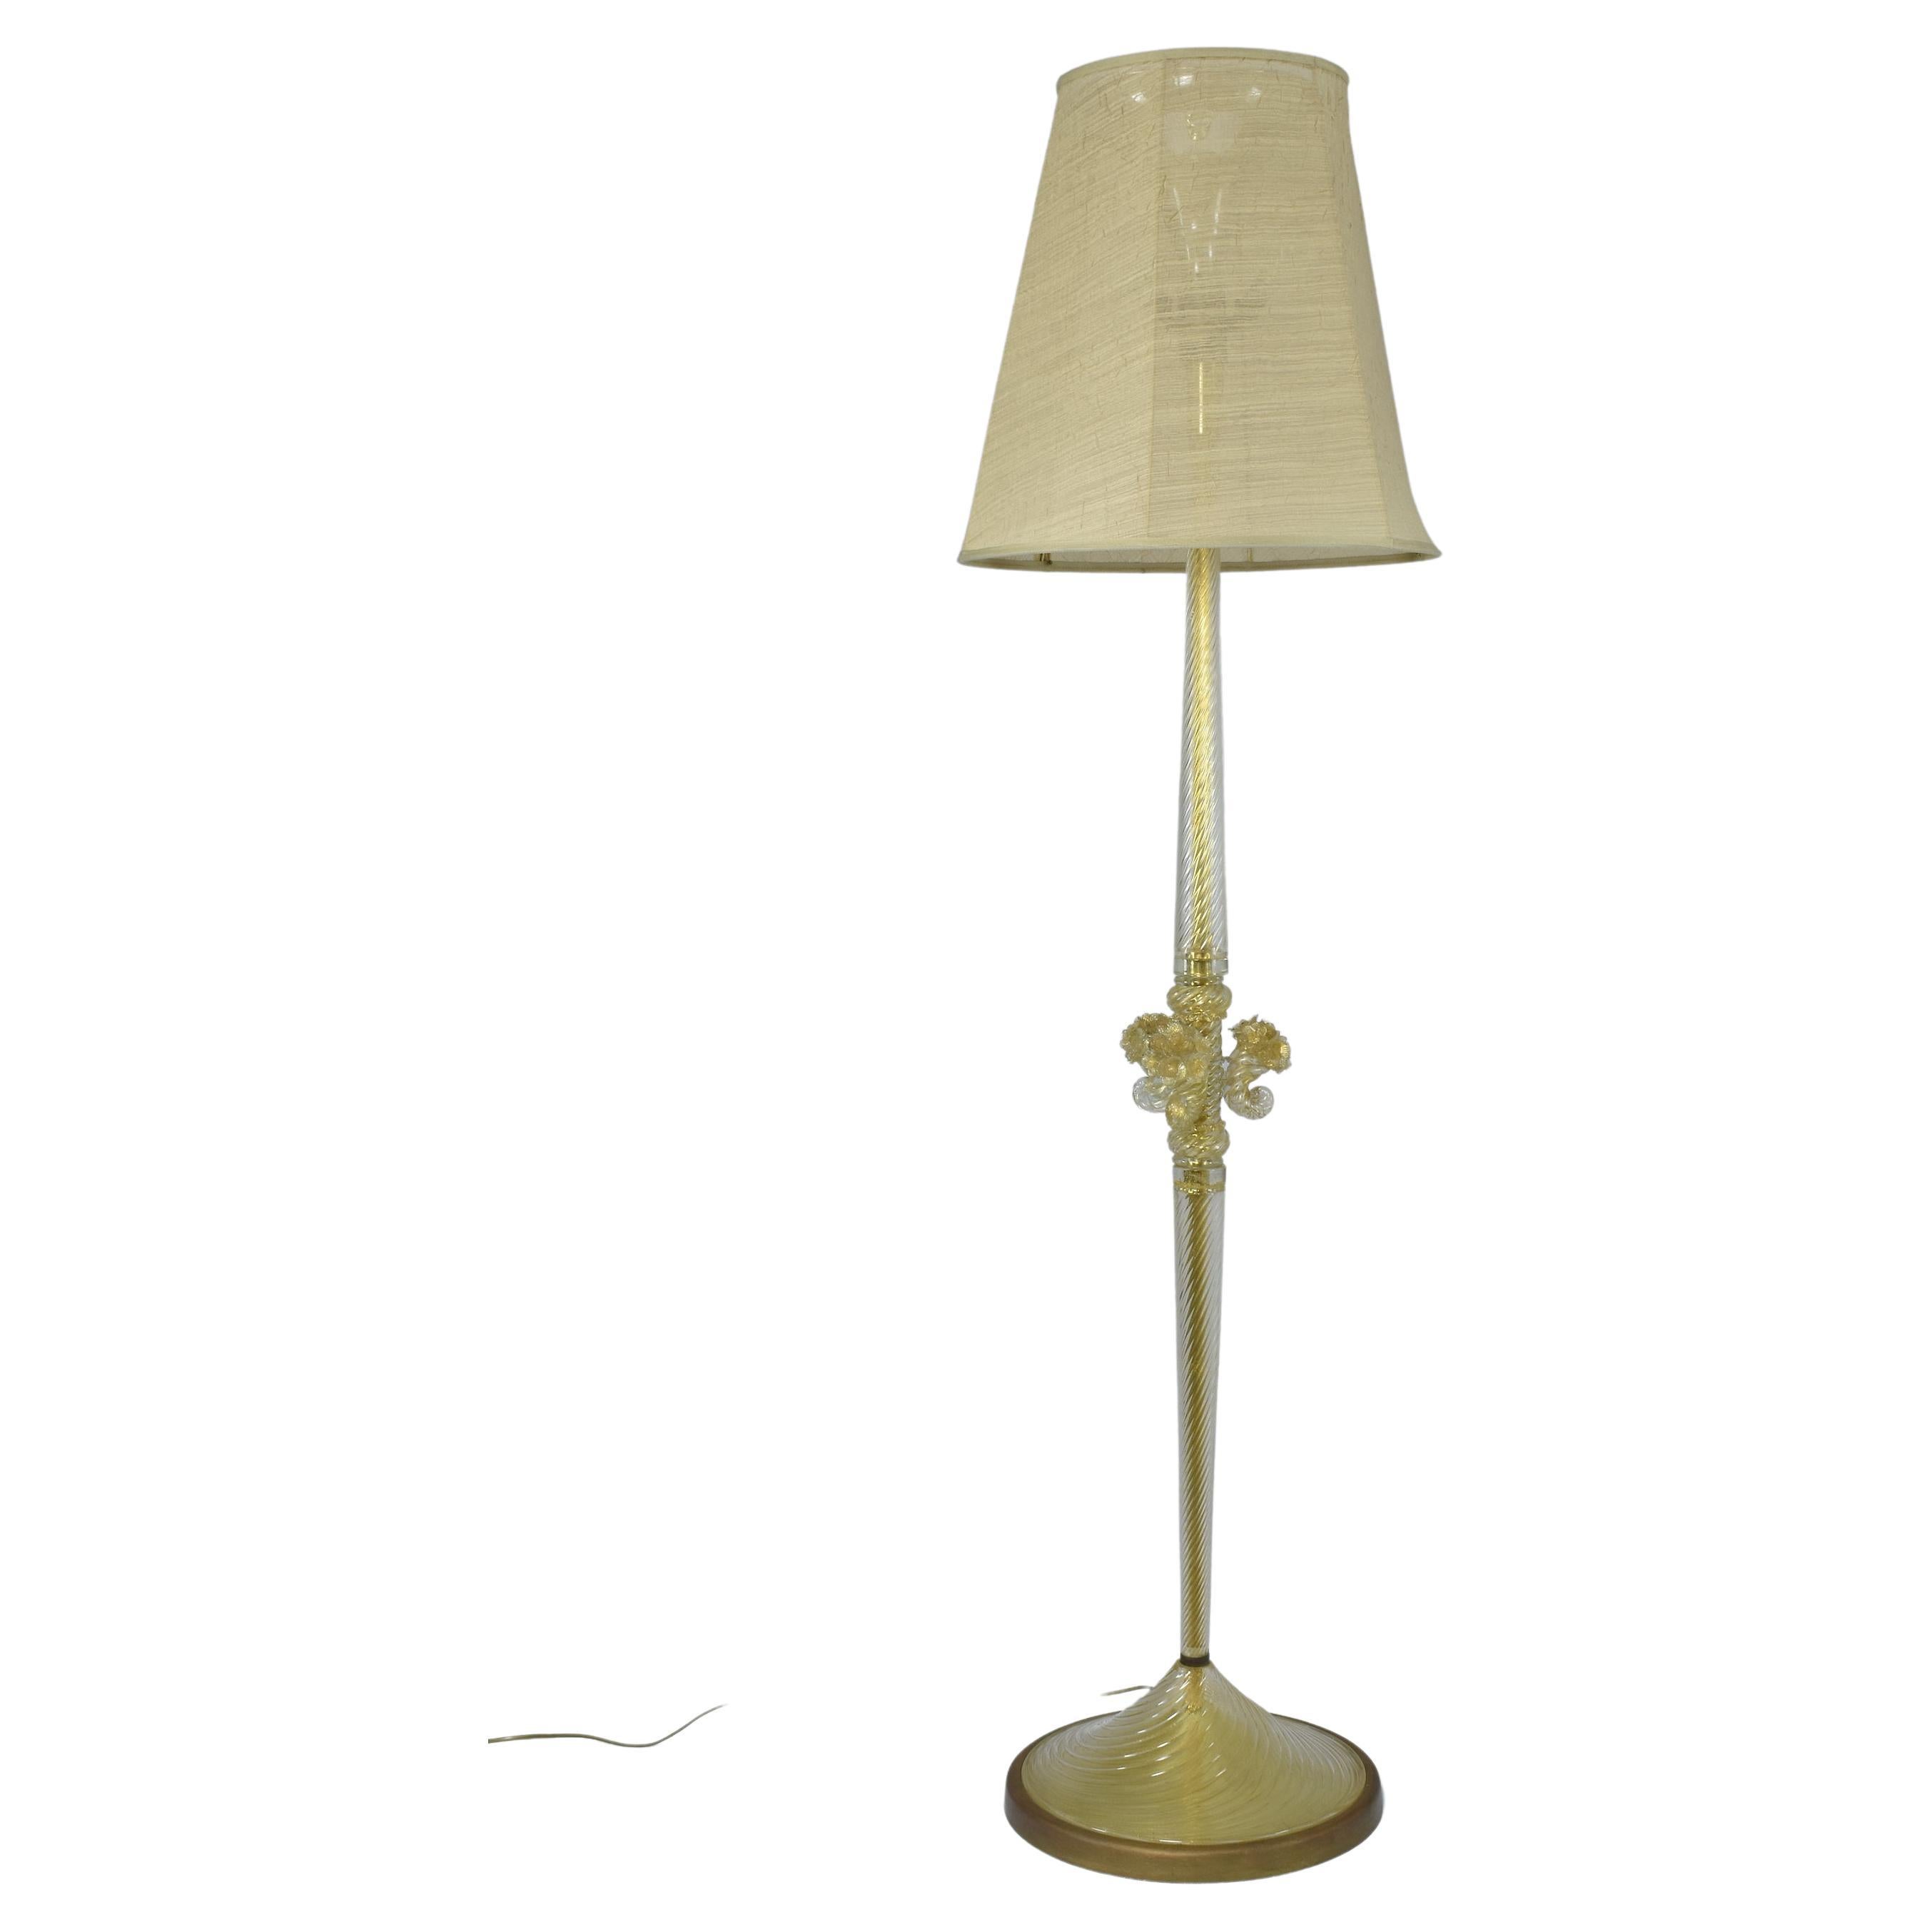 Italian Gold Murano Floor Lamp by Barovier Ercole, 1950s In Good Condition For Sale In Paris, FR